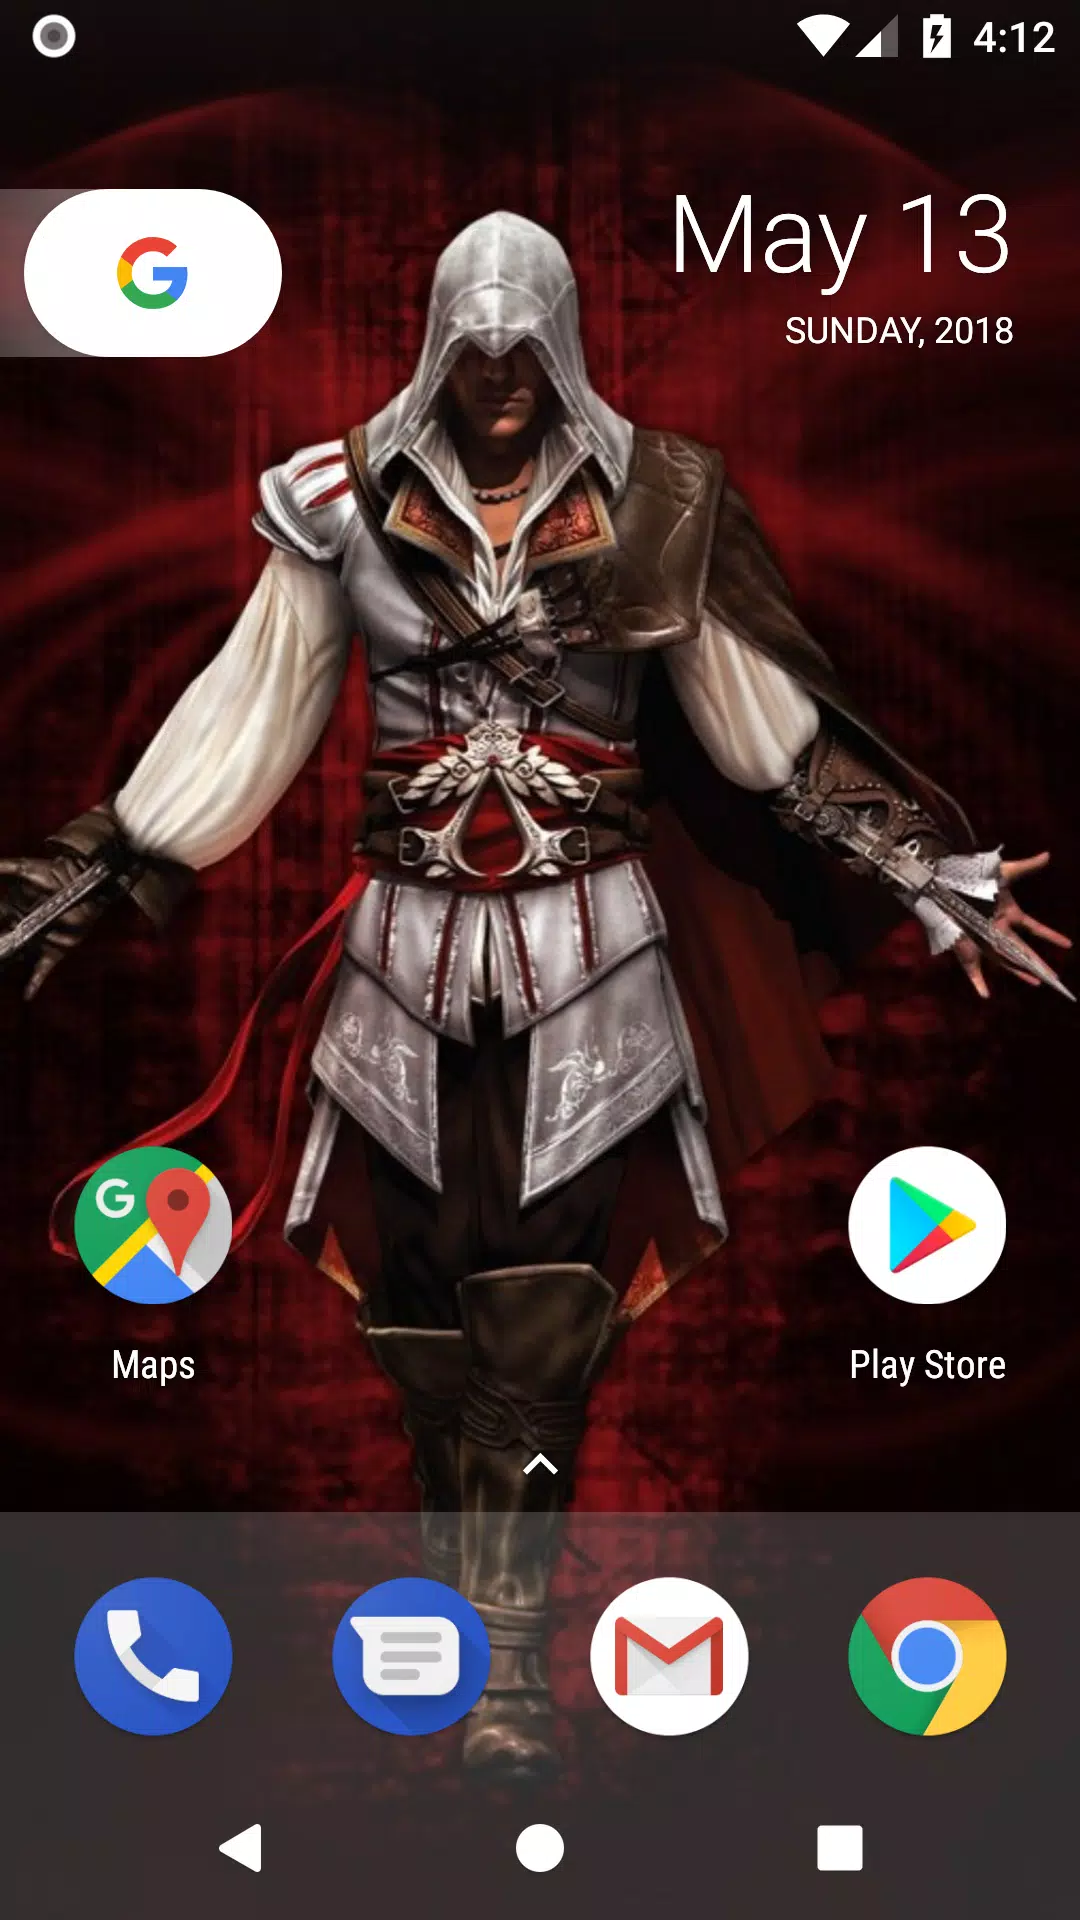 Tải xuống APK Assassin's Creed Wallpaper 4k cho Android